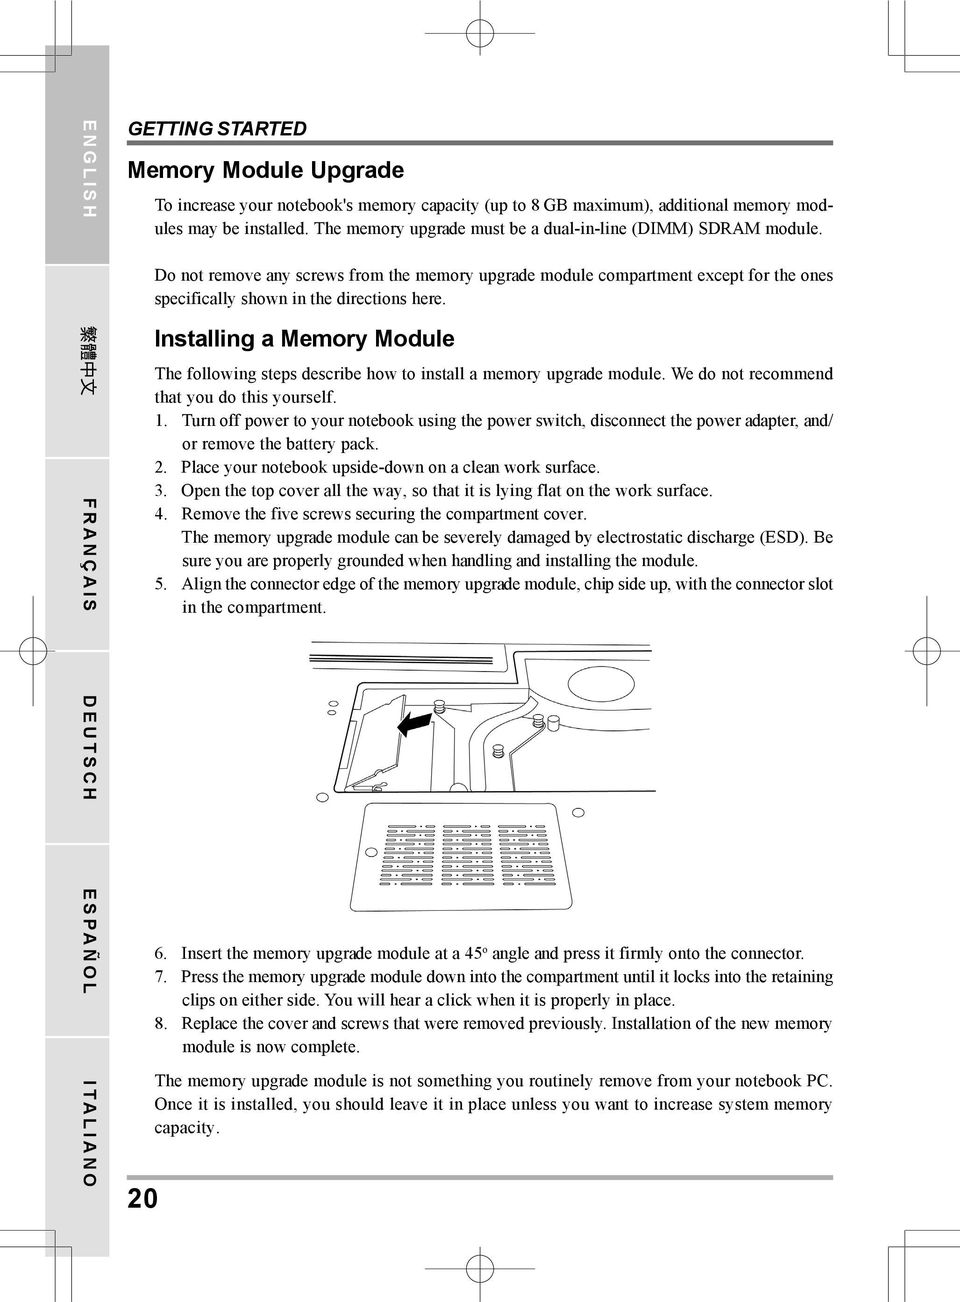 Installing a Memory Module The following steps describe how to install a memory upgrade module. We do not recommend that you do this yourself. 1.